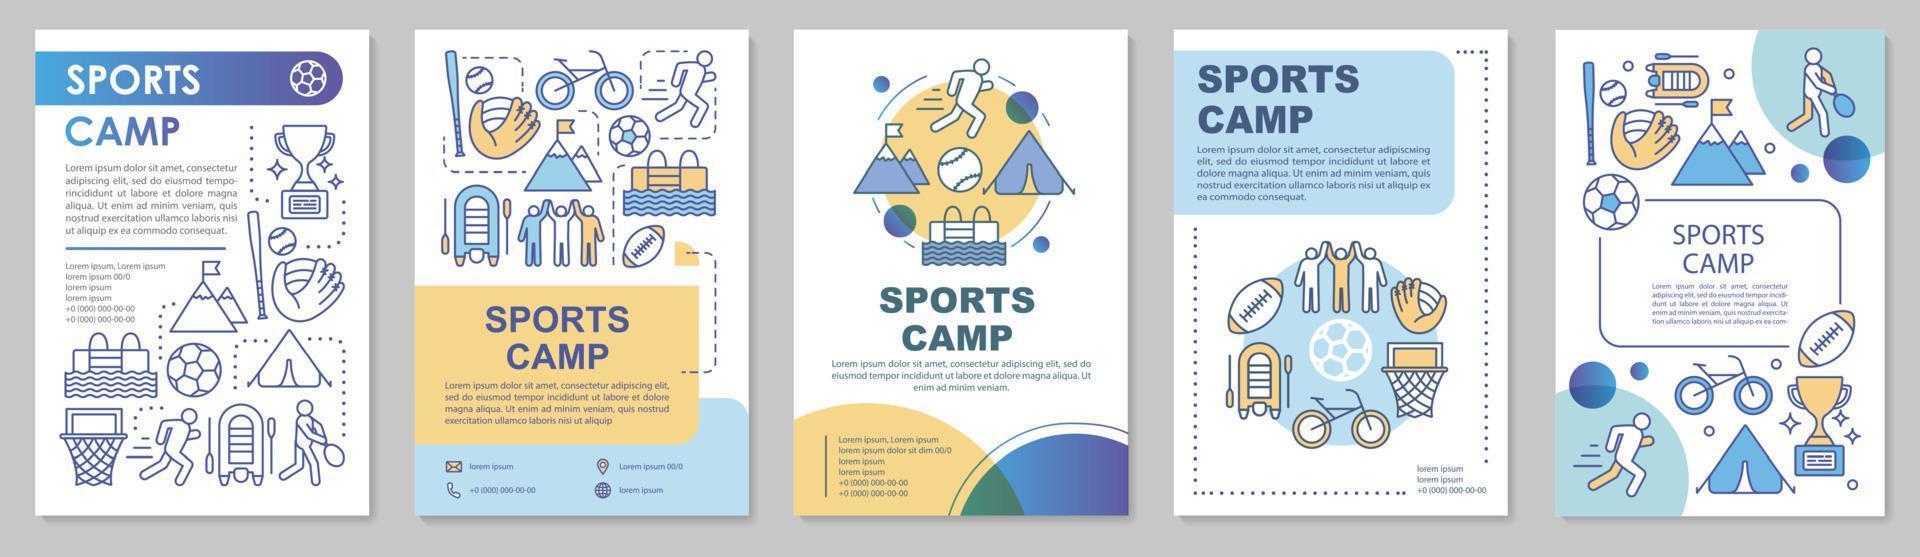 Sports camp, physical activity brochure template layout. Flyer, booklet, leaflet print design with linear illustrations. Vector page layouts for magazines, annual reports, advertising posters